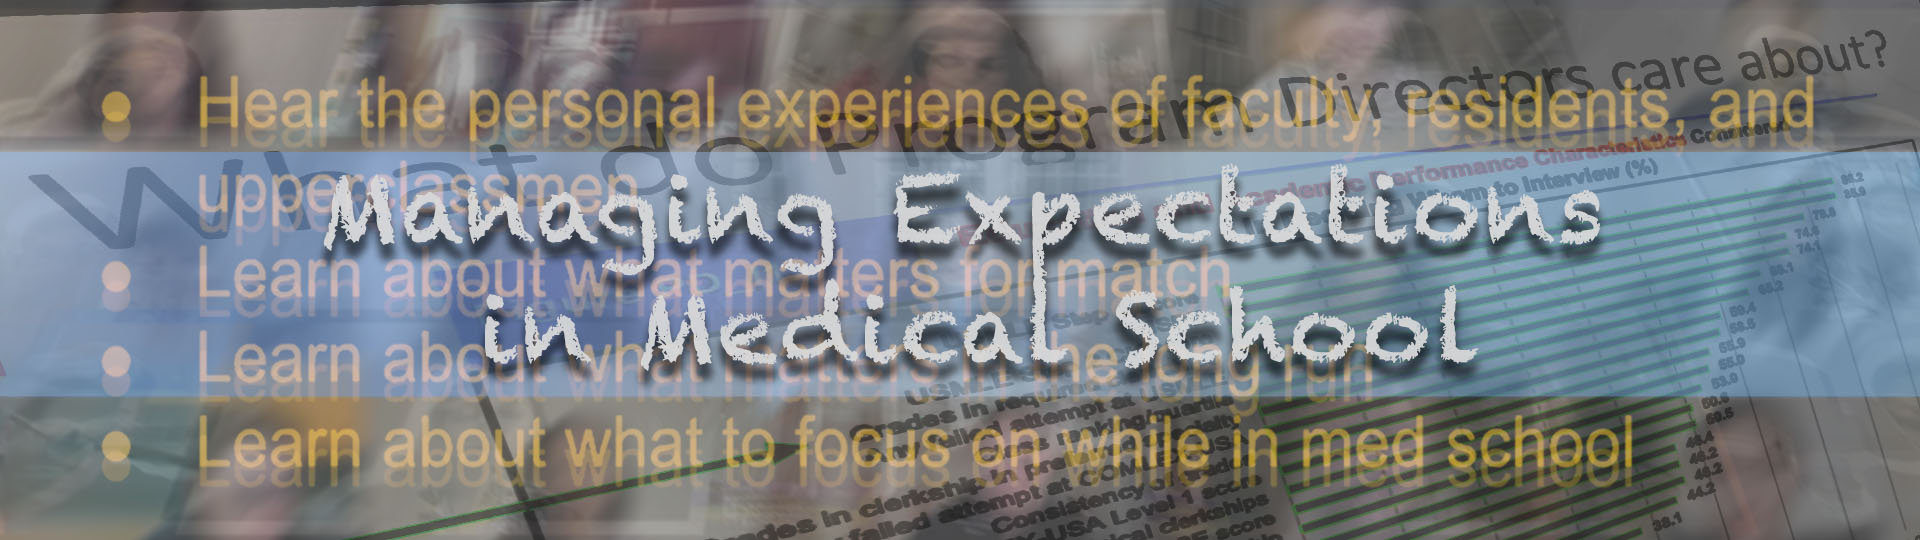 Wellness - Managing Expectations in Medical School (MP4)